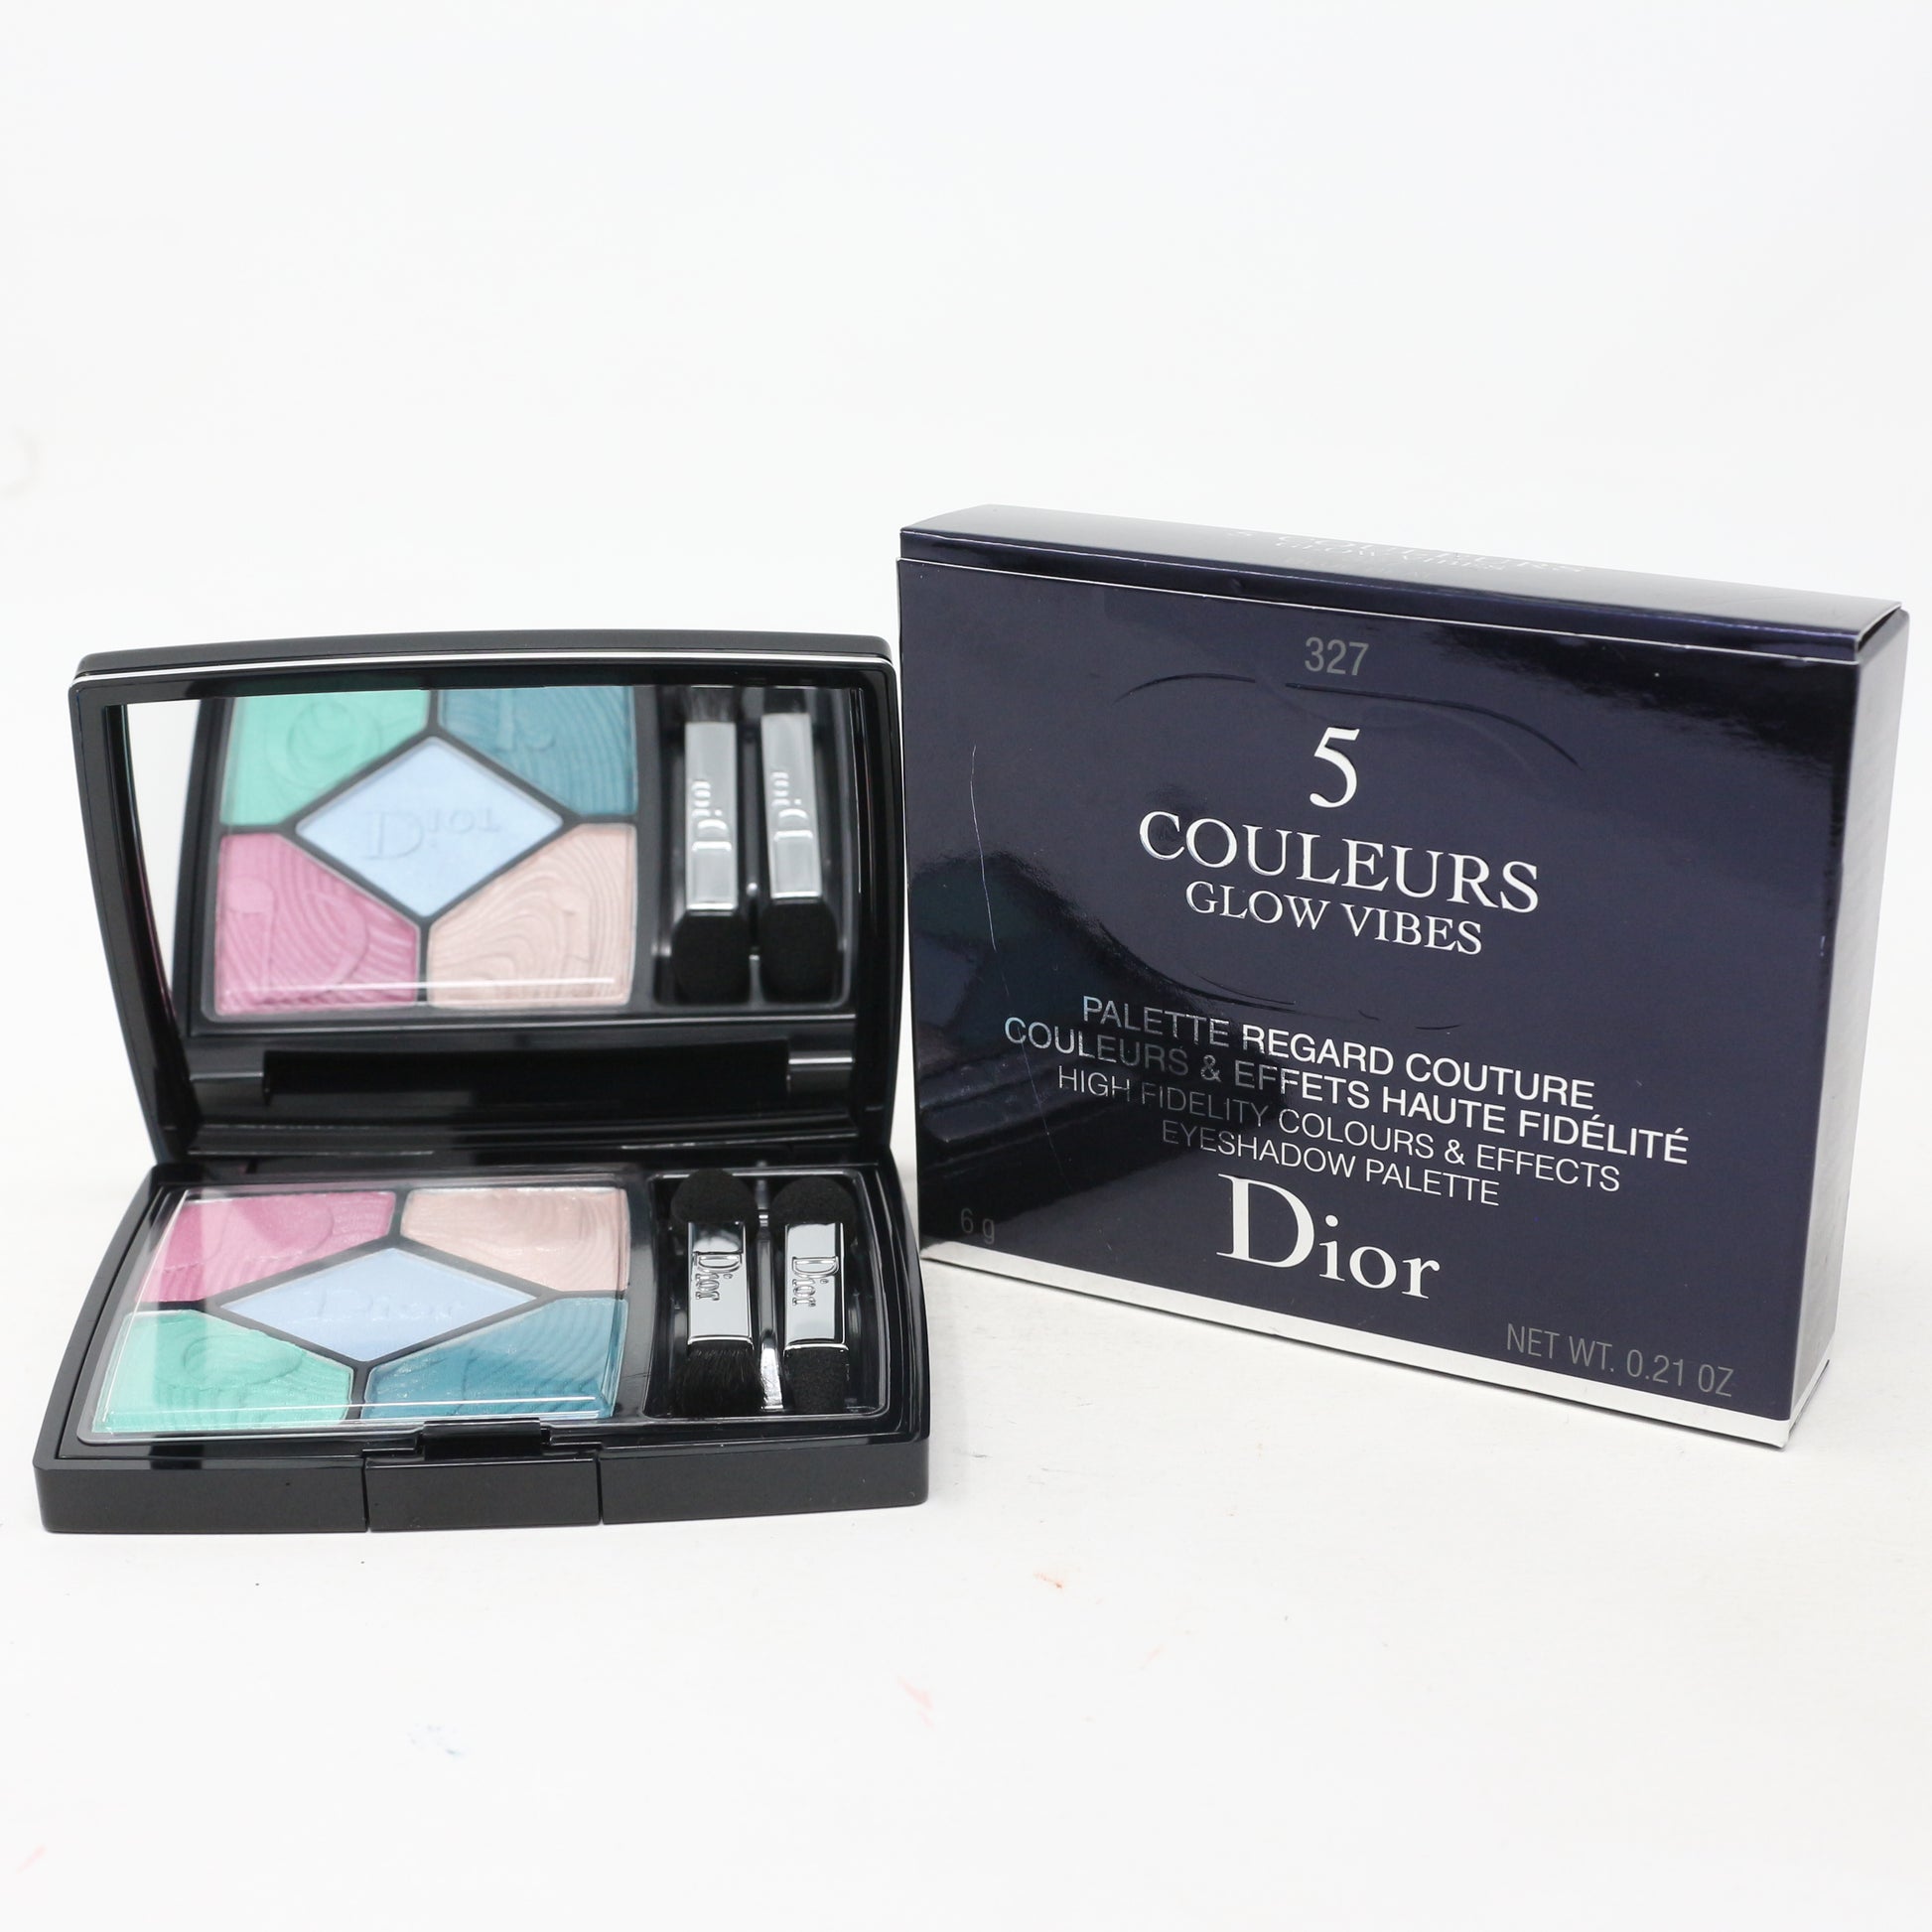 5 Couleurs Glow Vibes Eyeshadow Palette 6 g